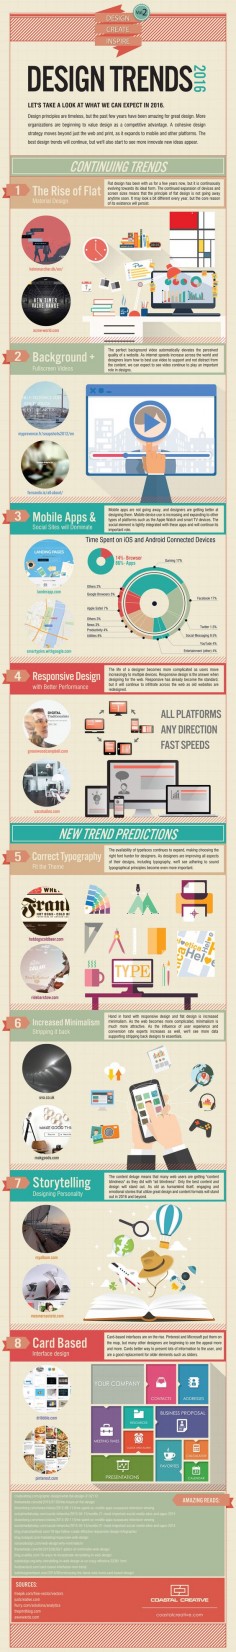 [INFOGRAPHIC] 8 Web Design Trends That Are Bound to Be Huge in 2016—Flat; Backgrounds; Mobile; Responsive; Type; Minimalism; Storytelling; Cards; Details>